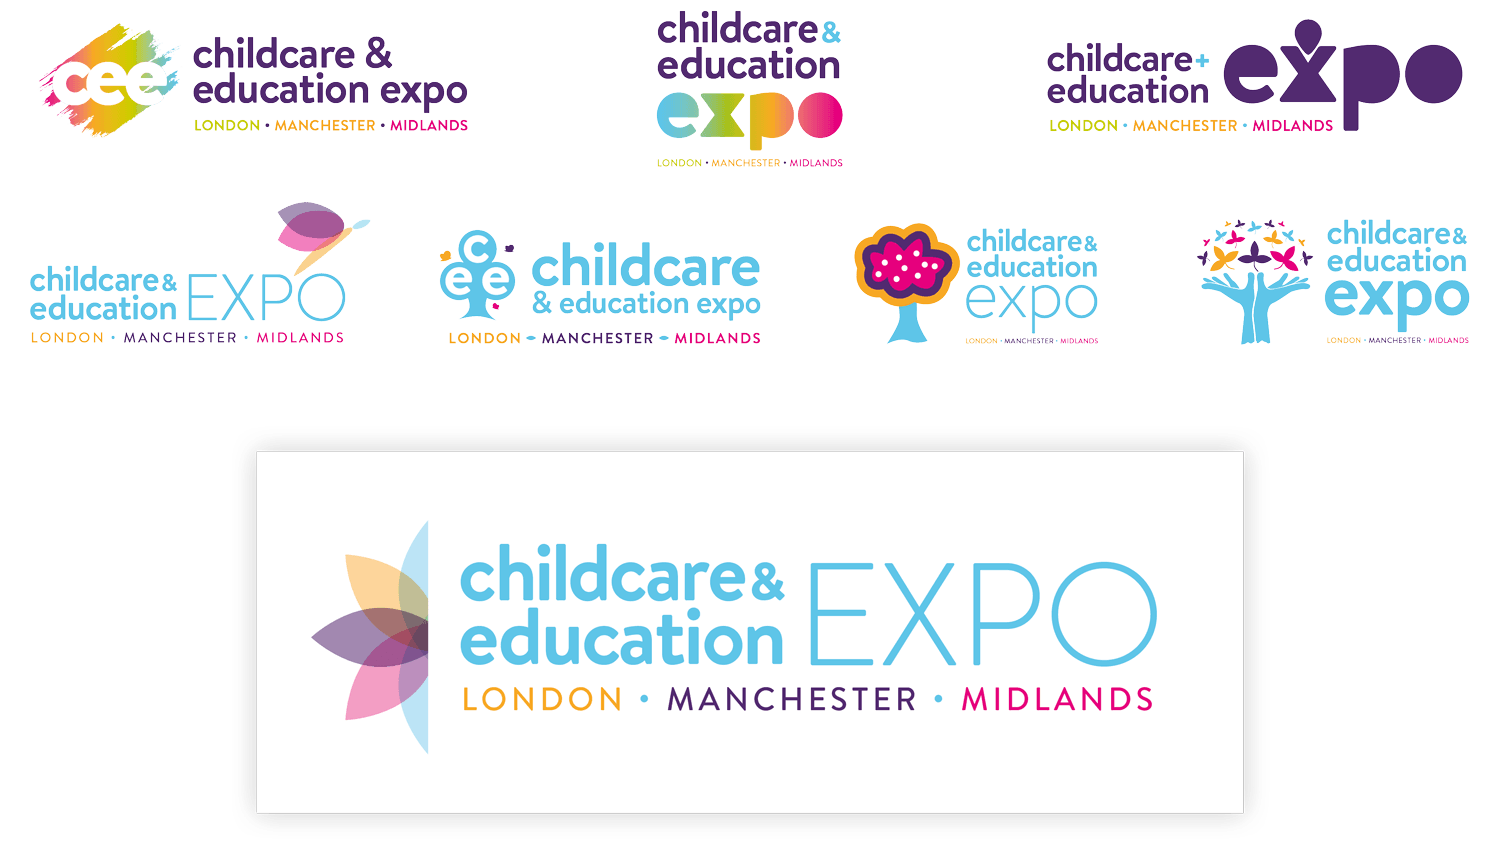 childcare and education expo logo rebrand